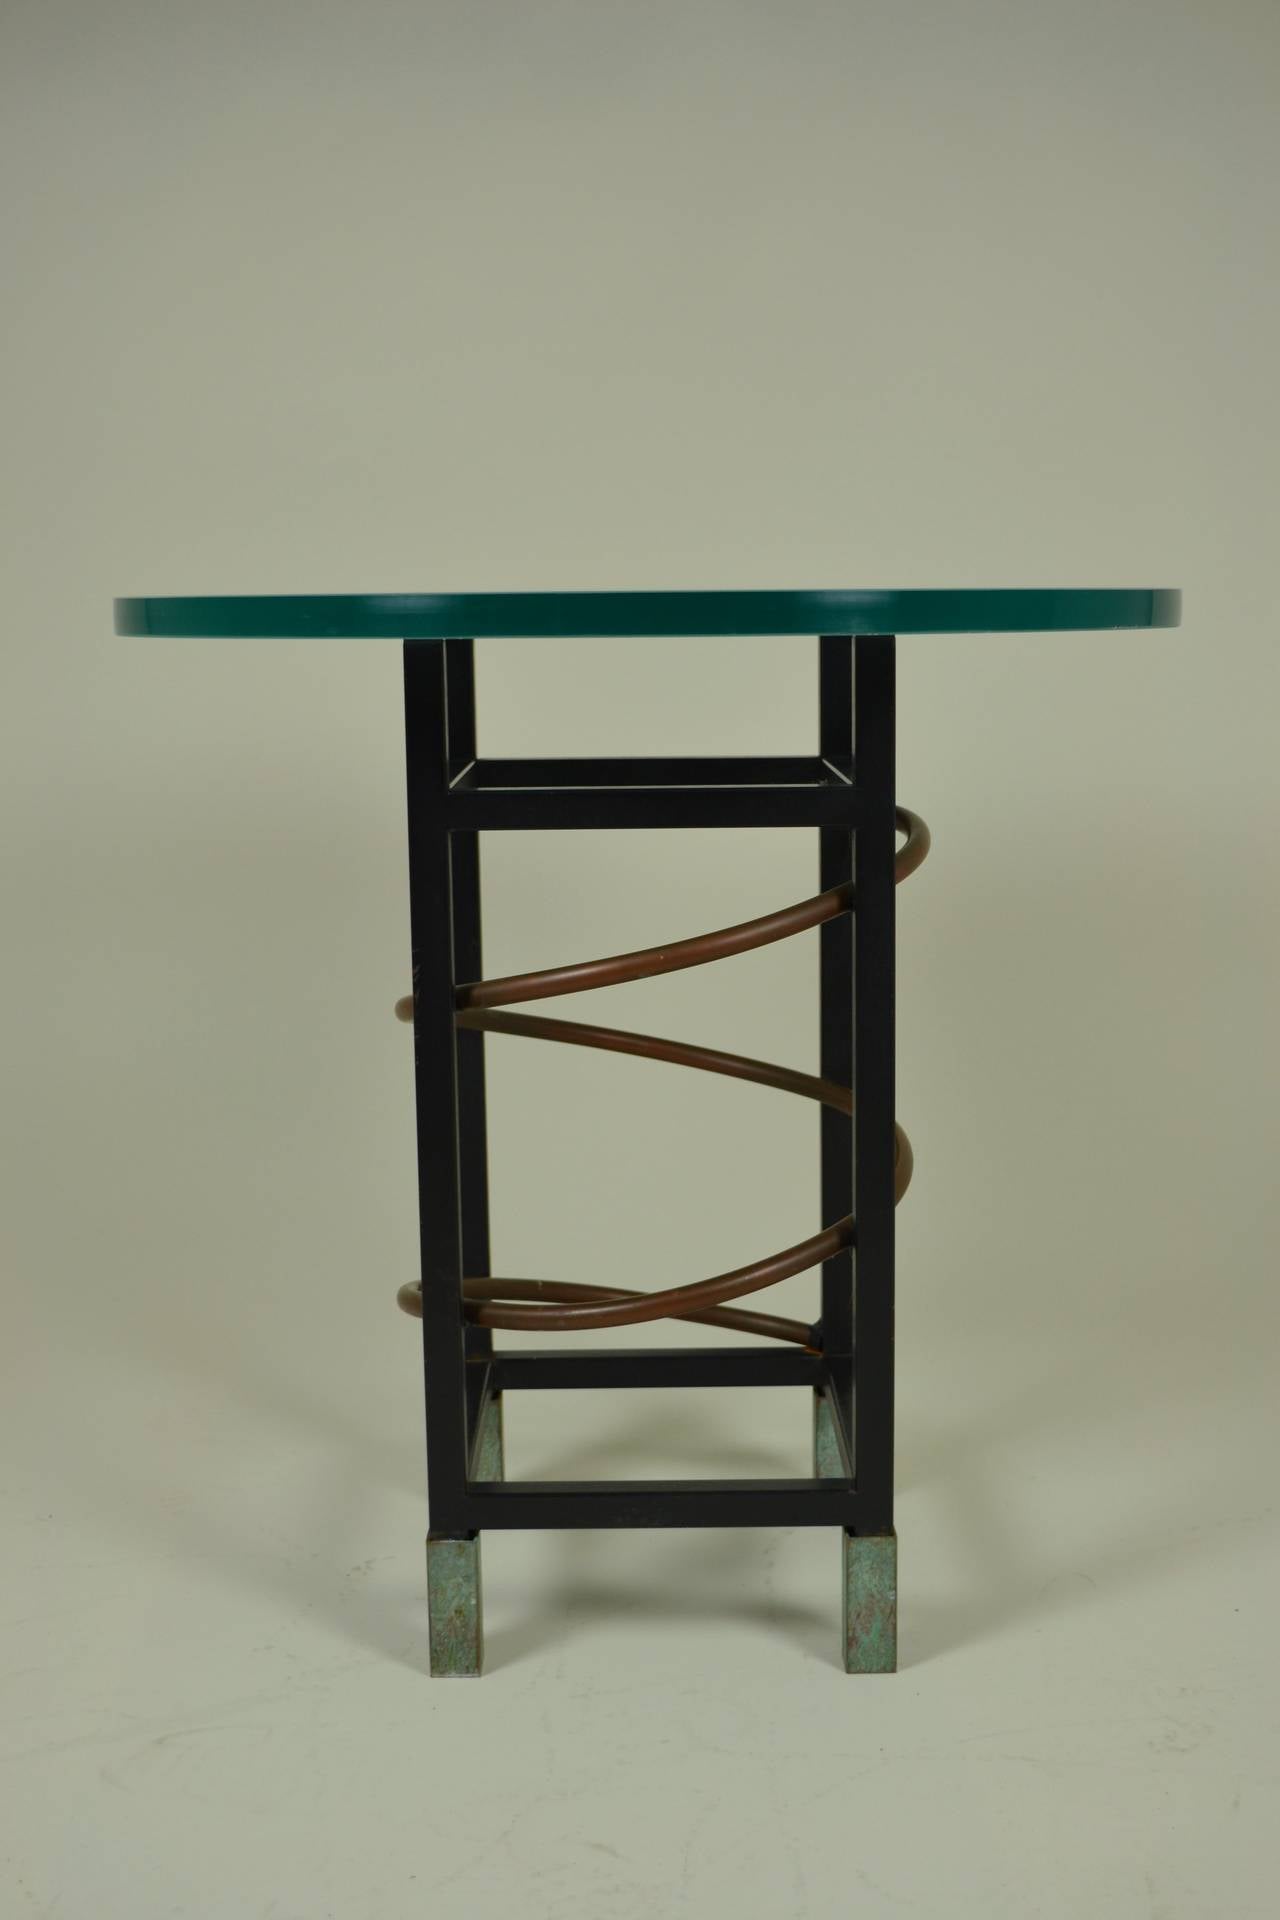 Mixed metal sculptural side table designed by James Rosen for Pace Collection.  First presented in a wedding themed window display at Tiffany & Co. in 1986. Named 